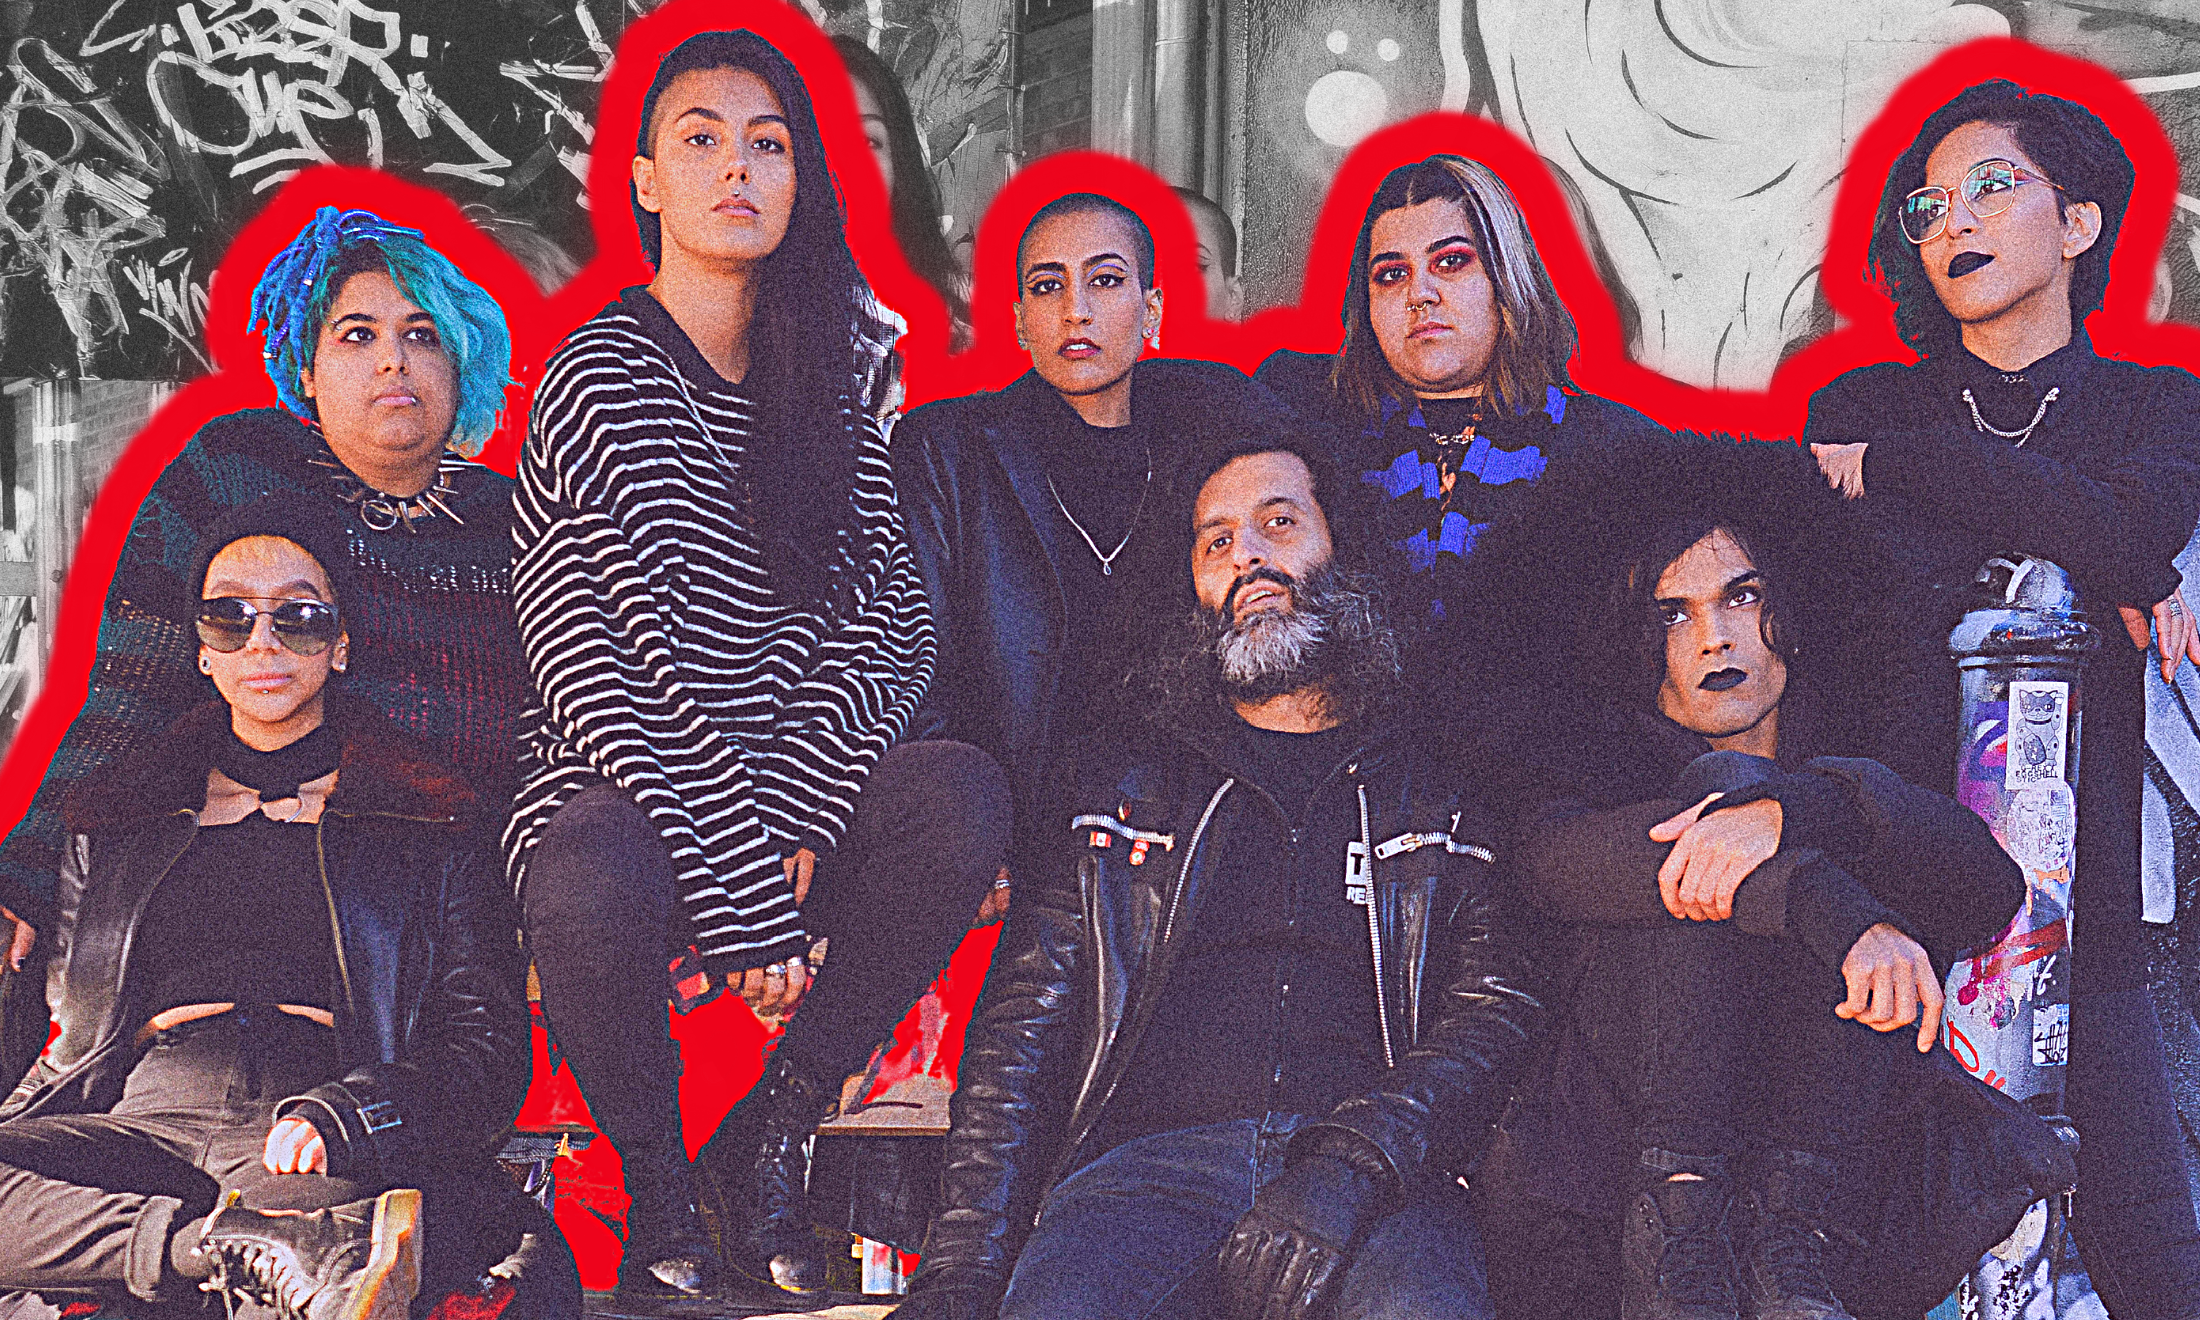 ‘Weirdo’ is the bold zine uplifting alternative South Asian voices in music and beyond